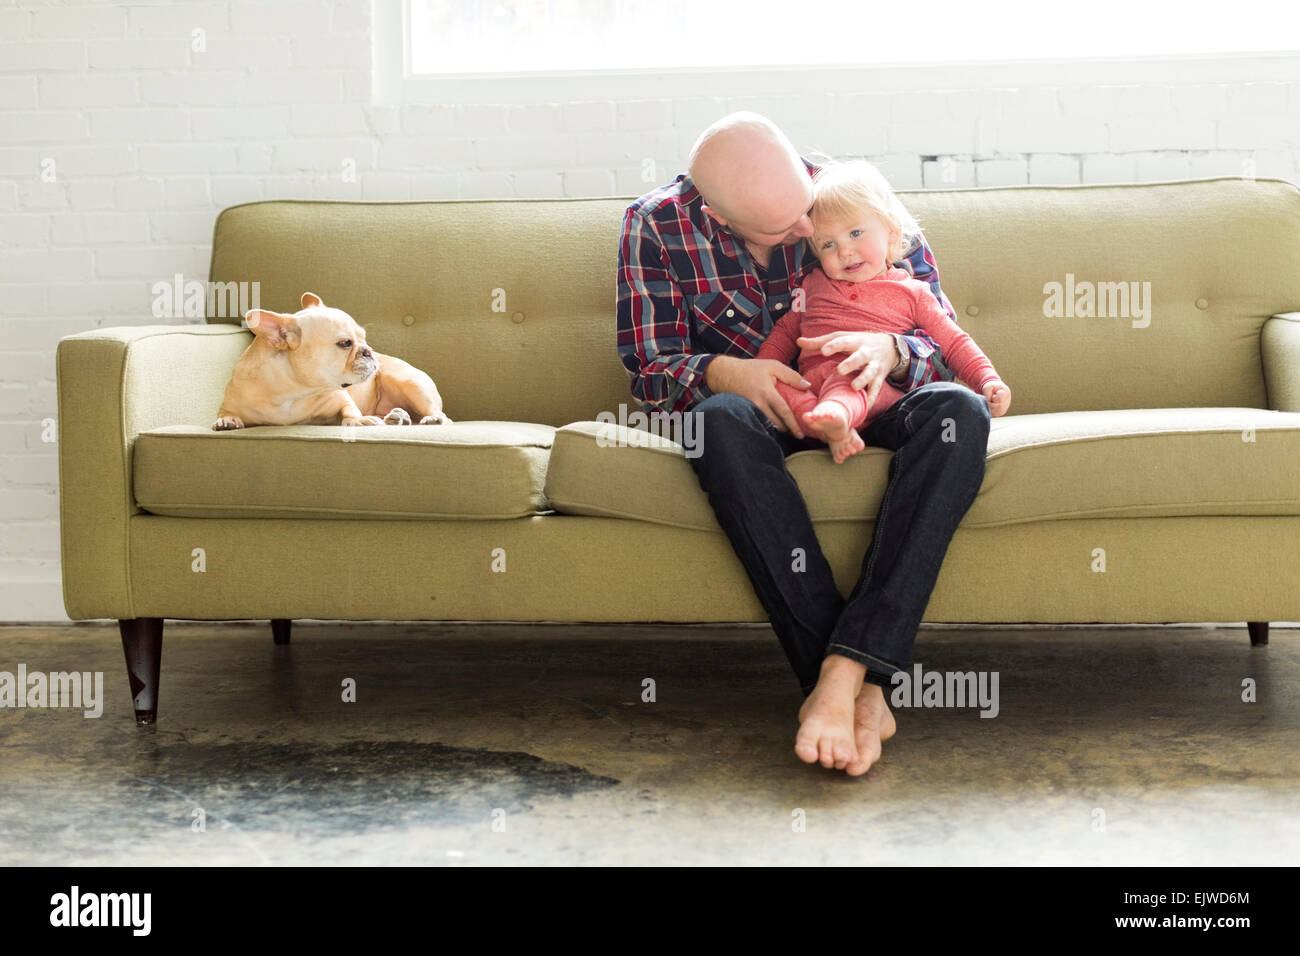 Father sitting on sofa embracing baby son (2-3) Stock Photo